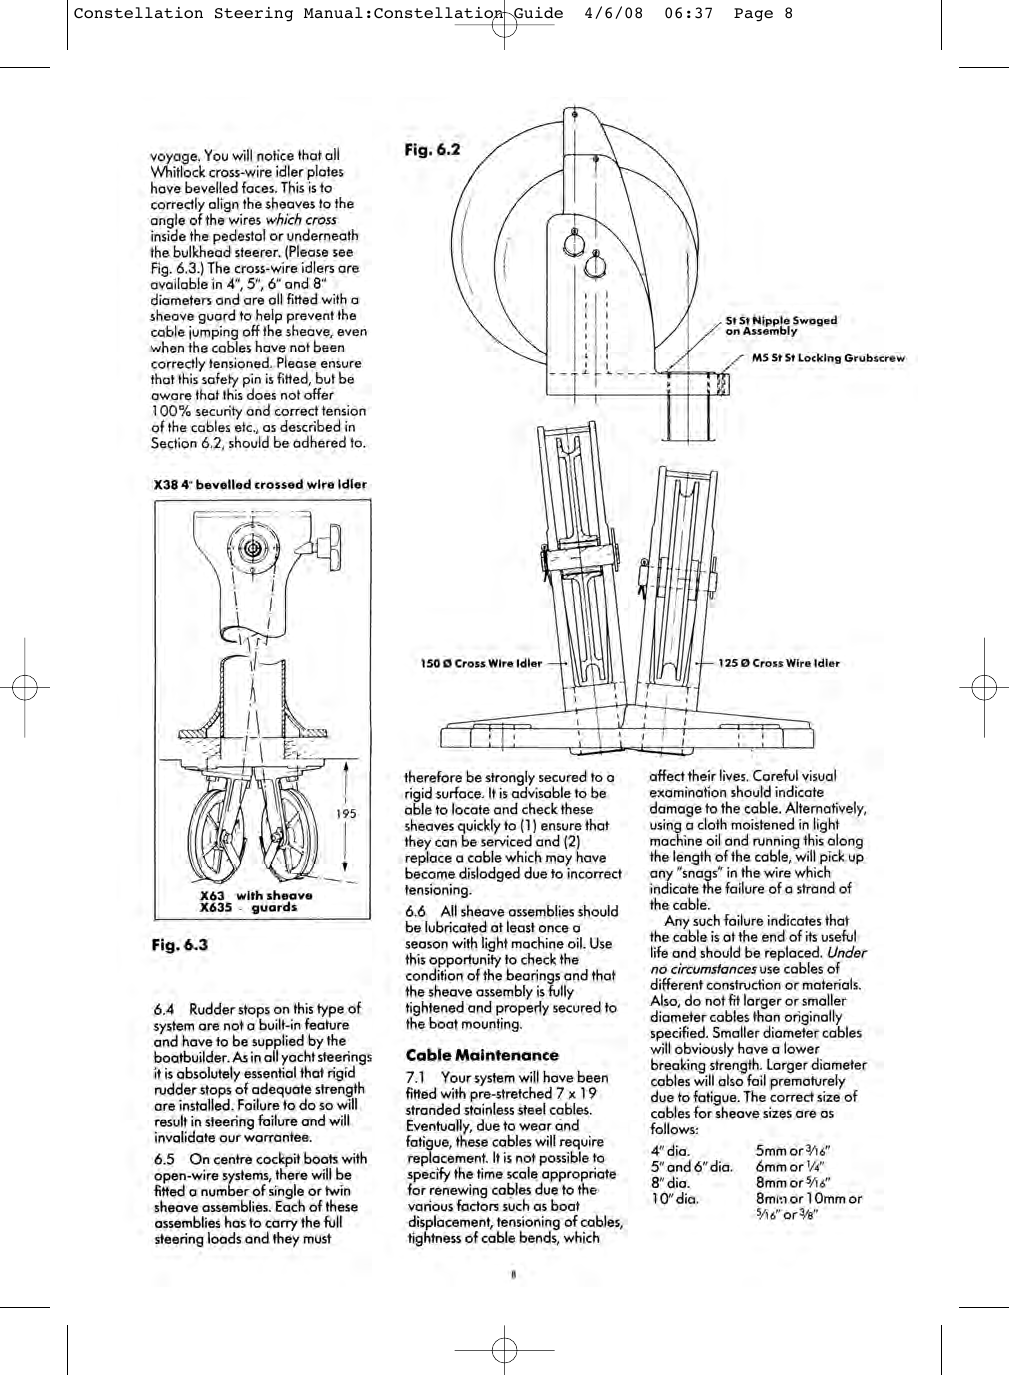 Page 8 of 8 - Constellation Steering Manual:Constellation Guide Constellation-Steering-Manual